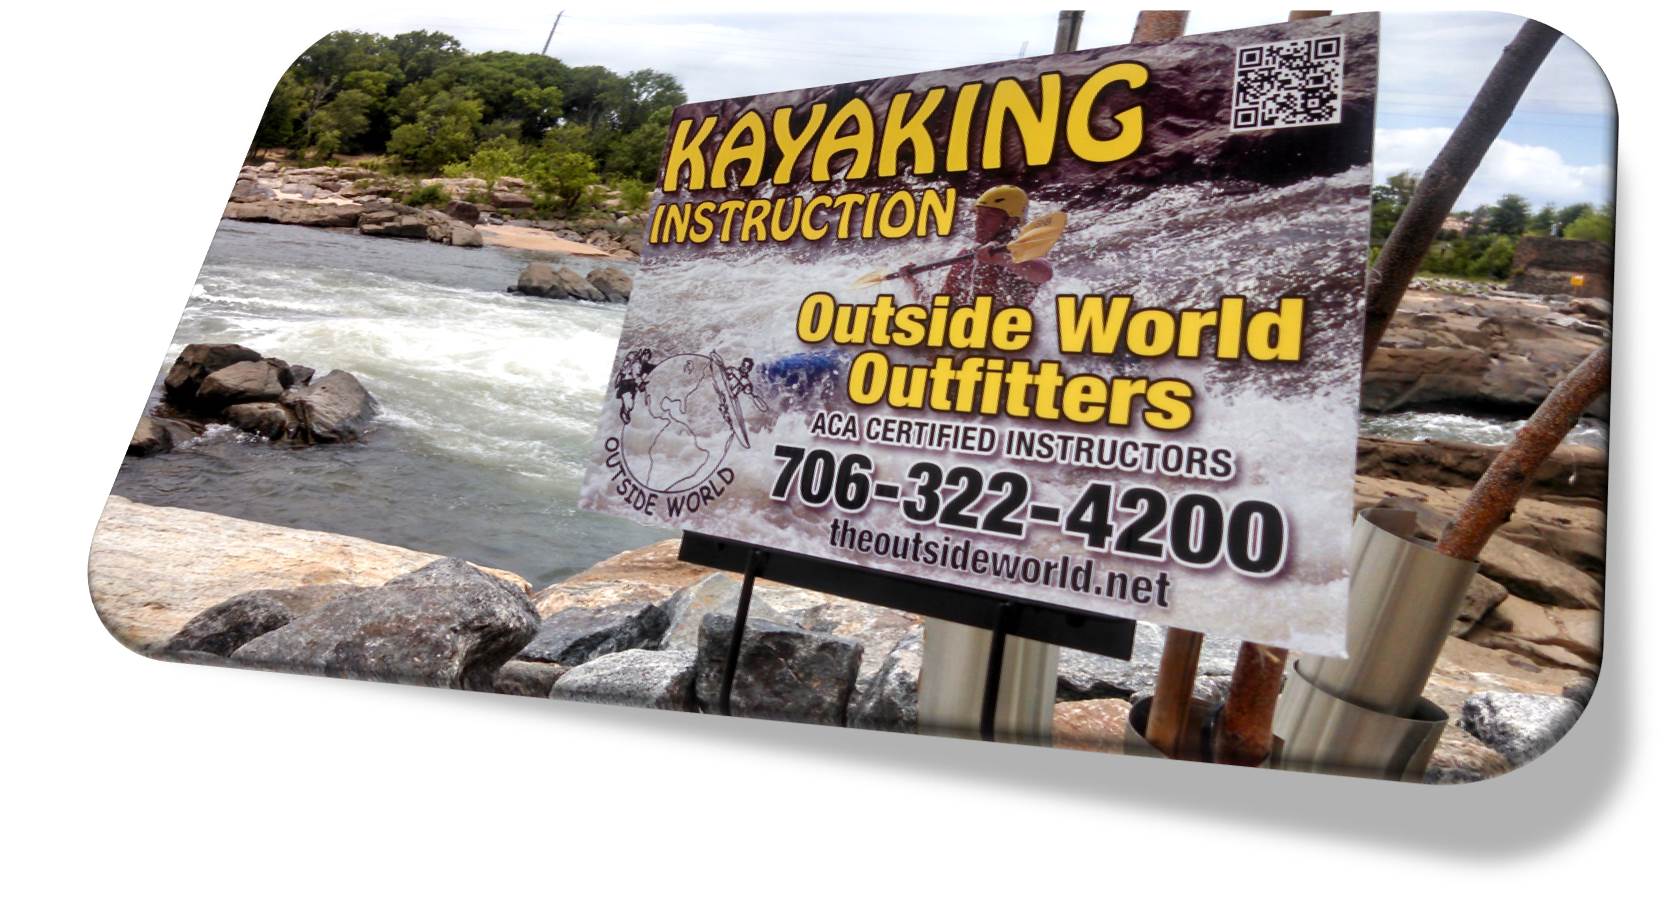 Review: Kayaking with Outside World Outfitters